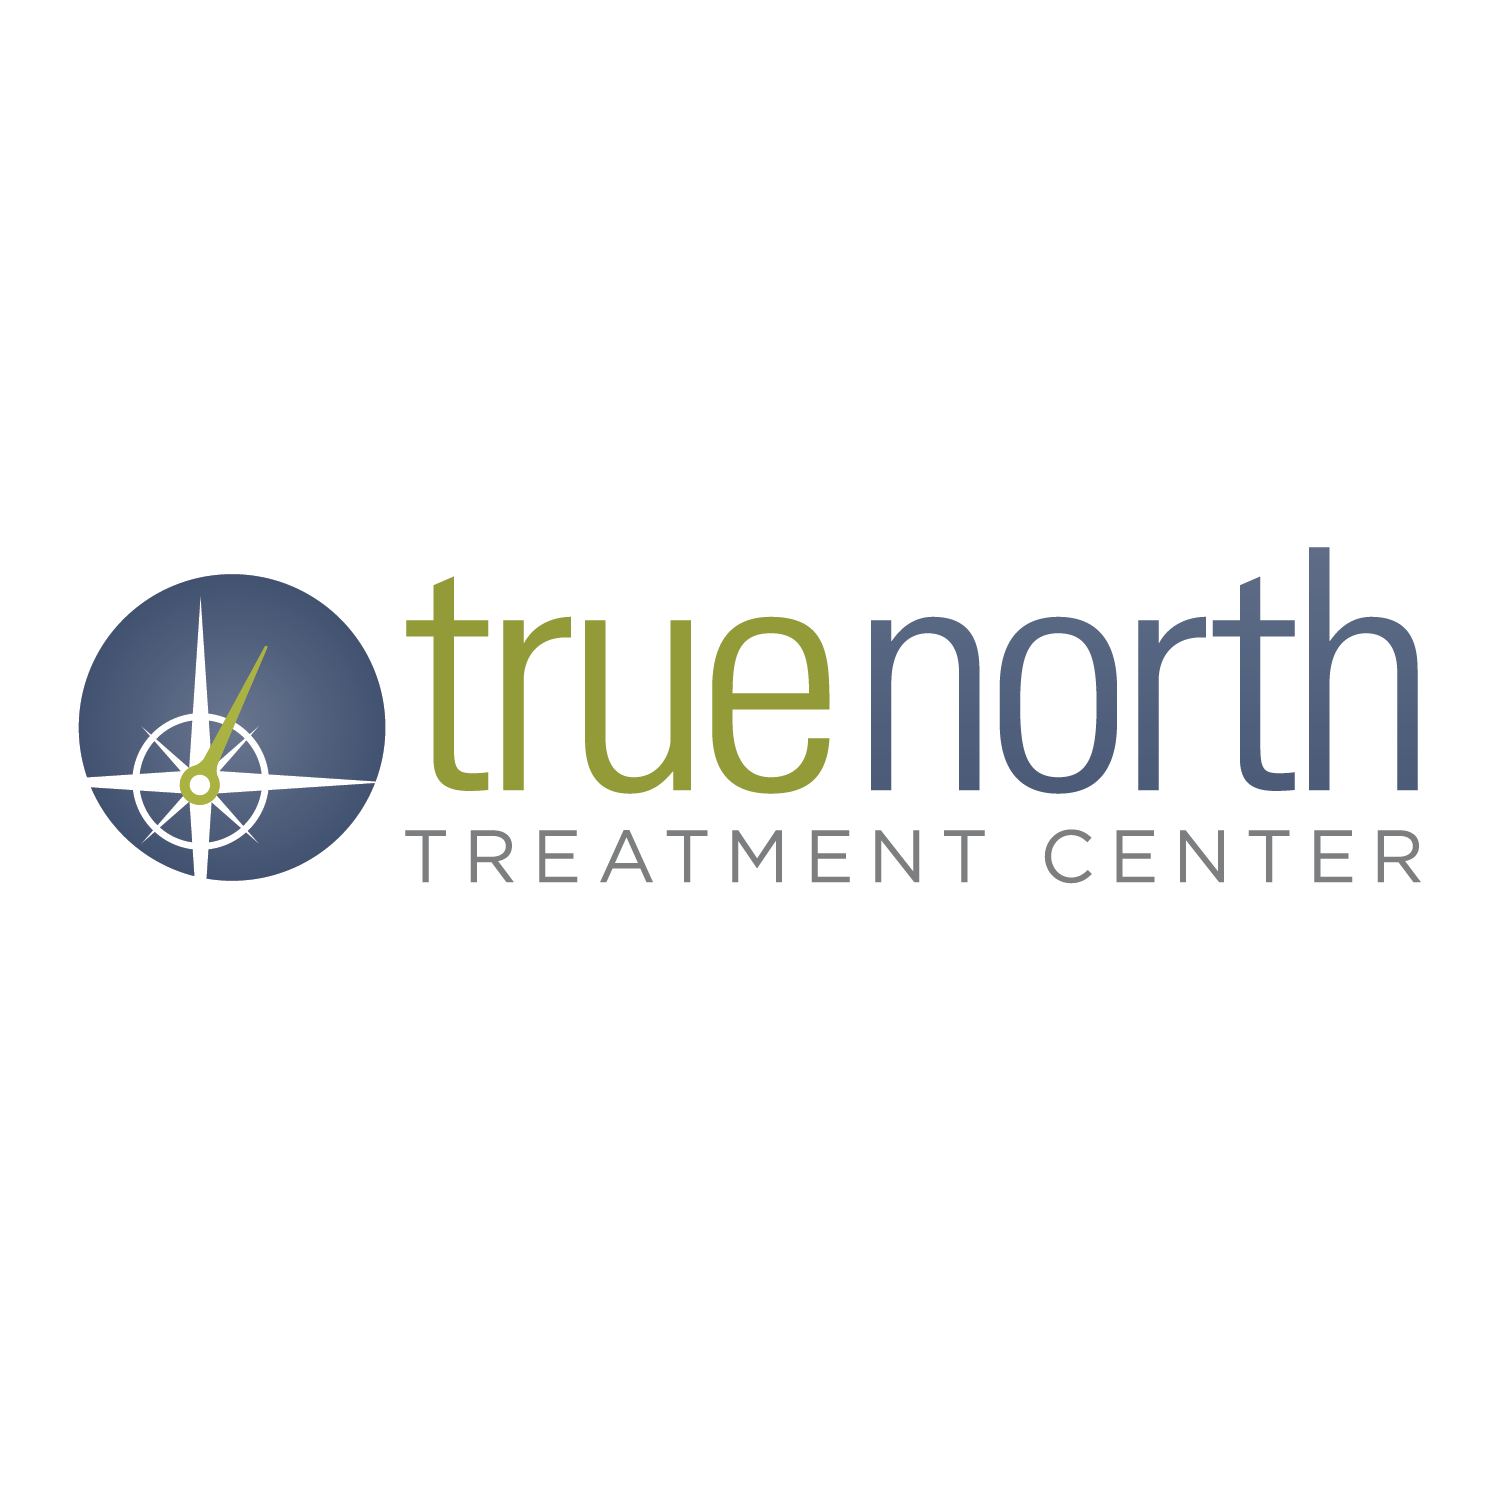 True North Treatment Center | Discovering your truth